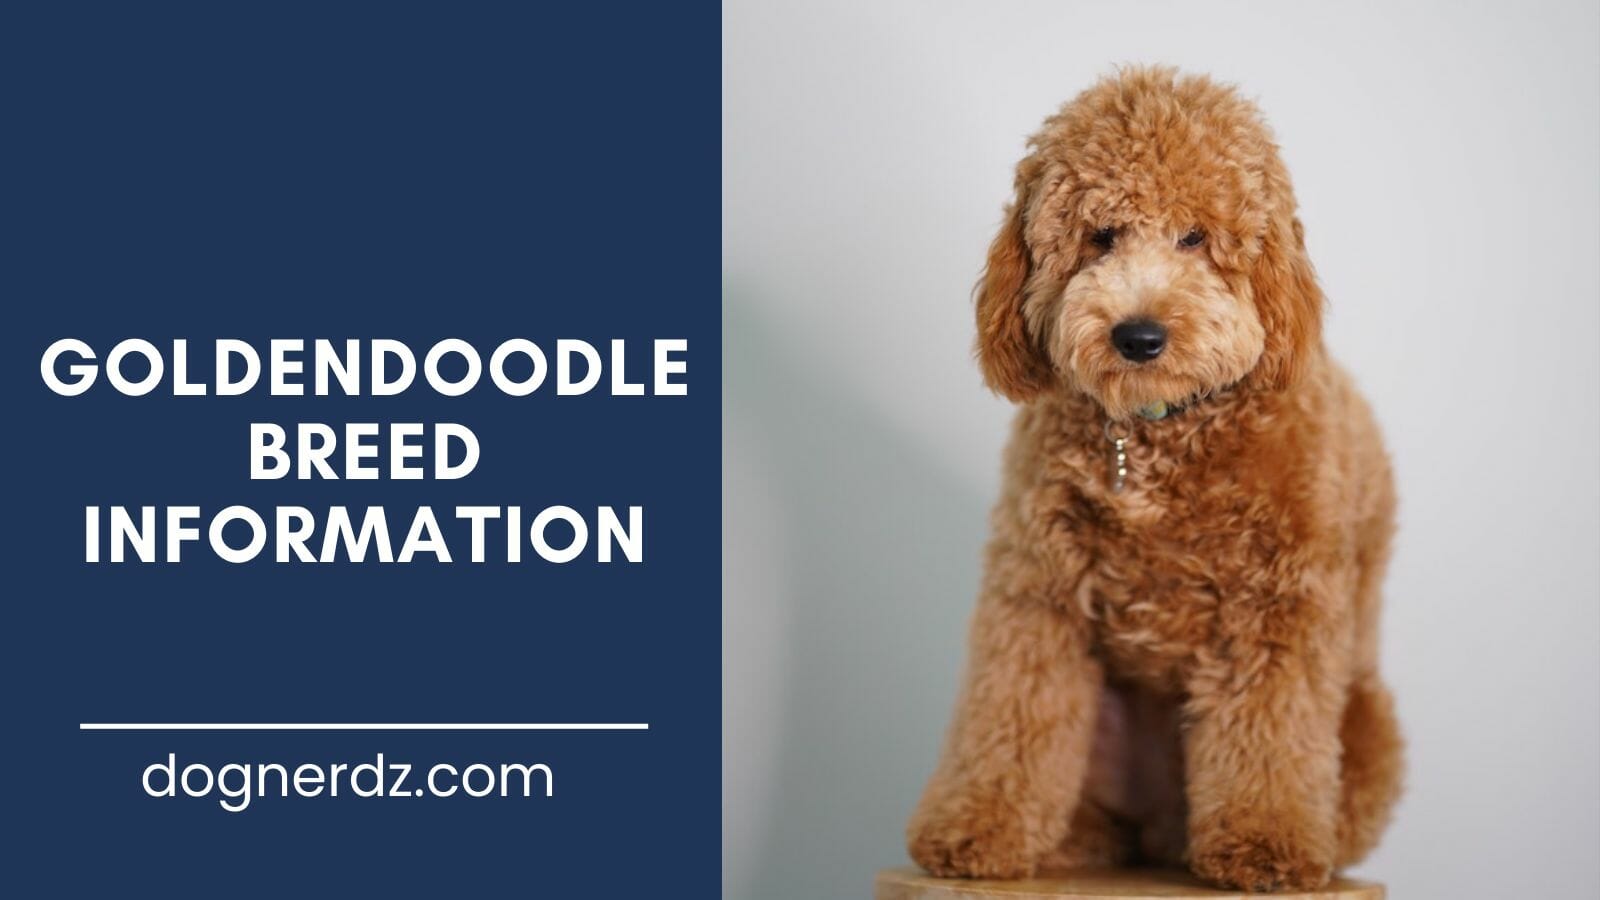 meet the goldendoodle: the designer breed that has been sweeping america